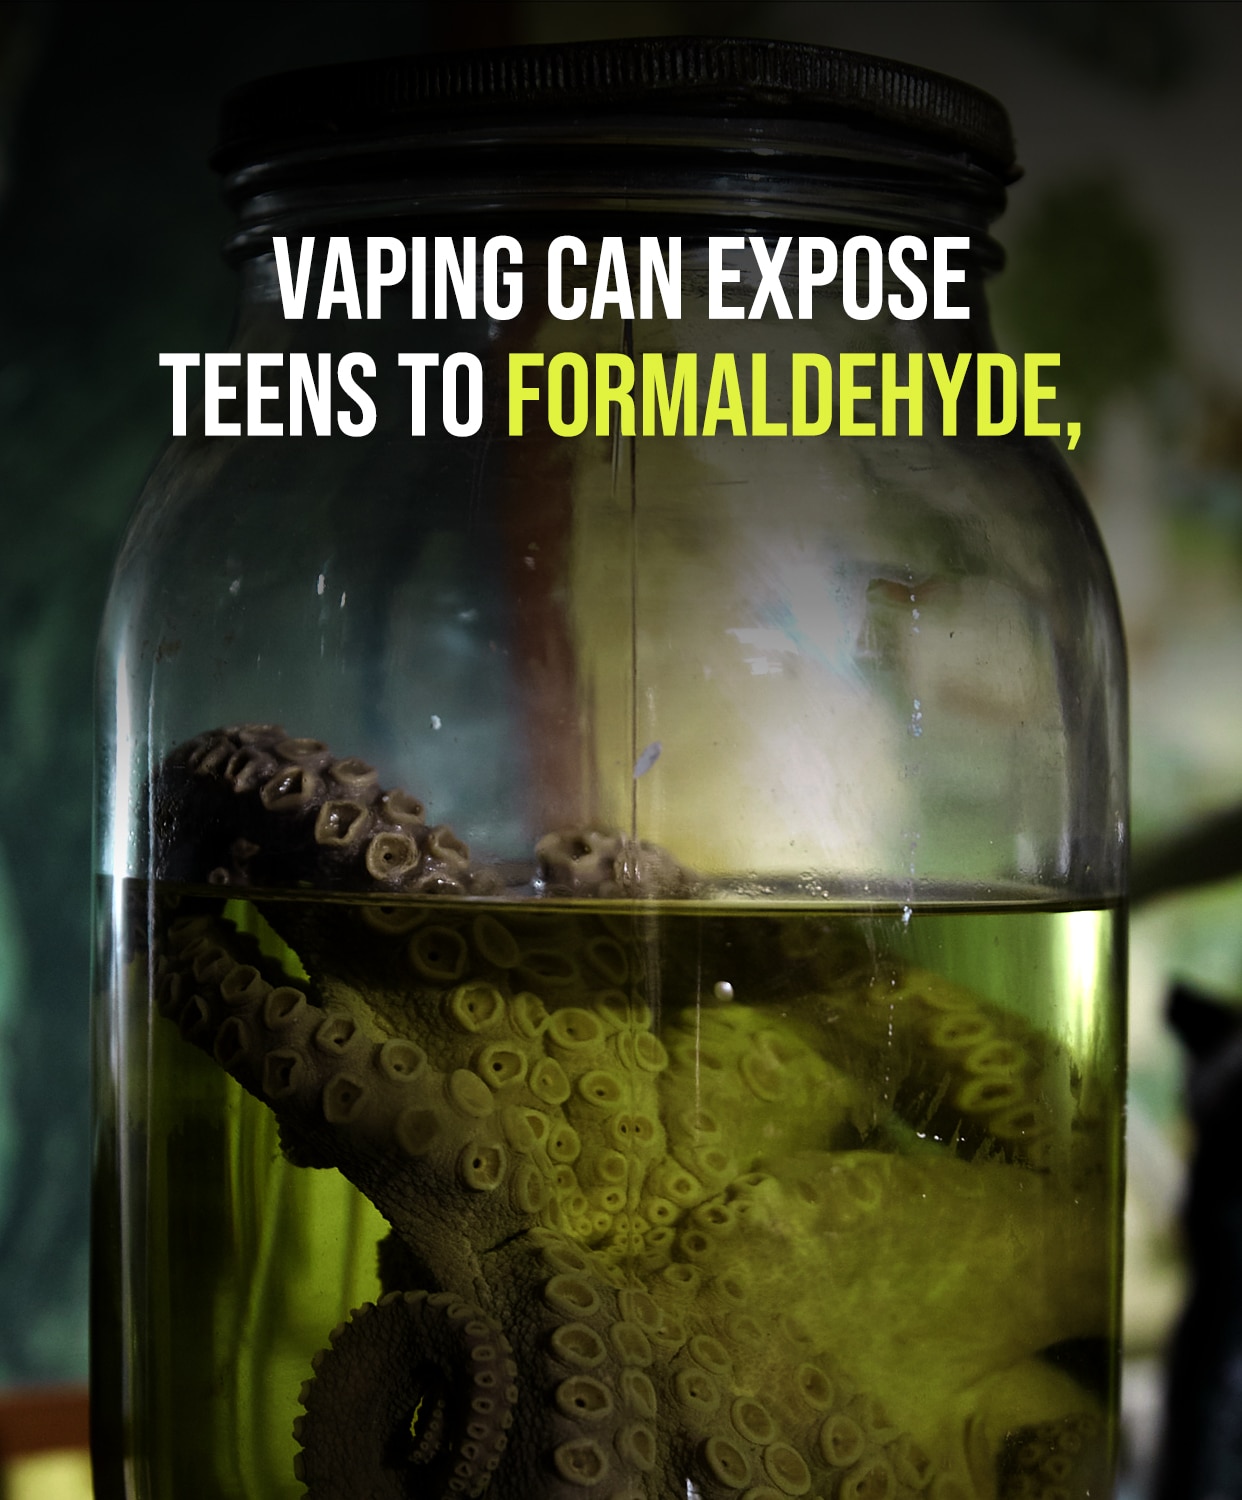 Vaping can expose teens to formaldehyde